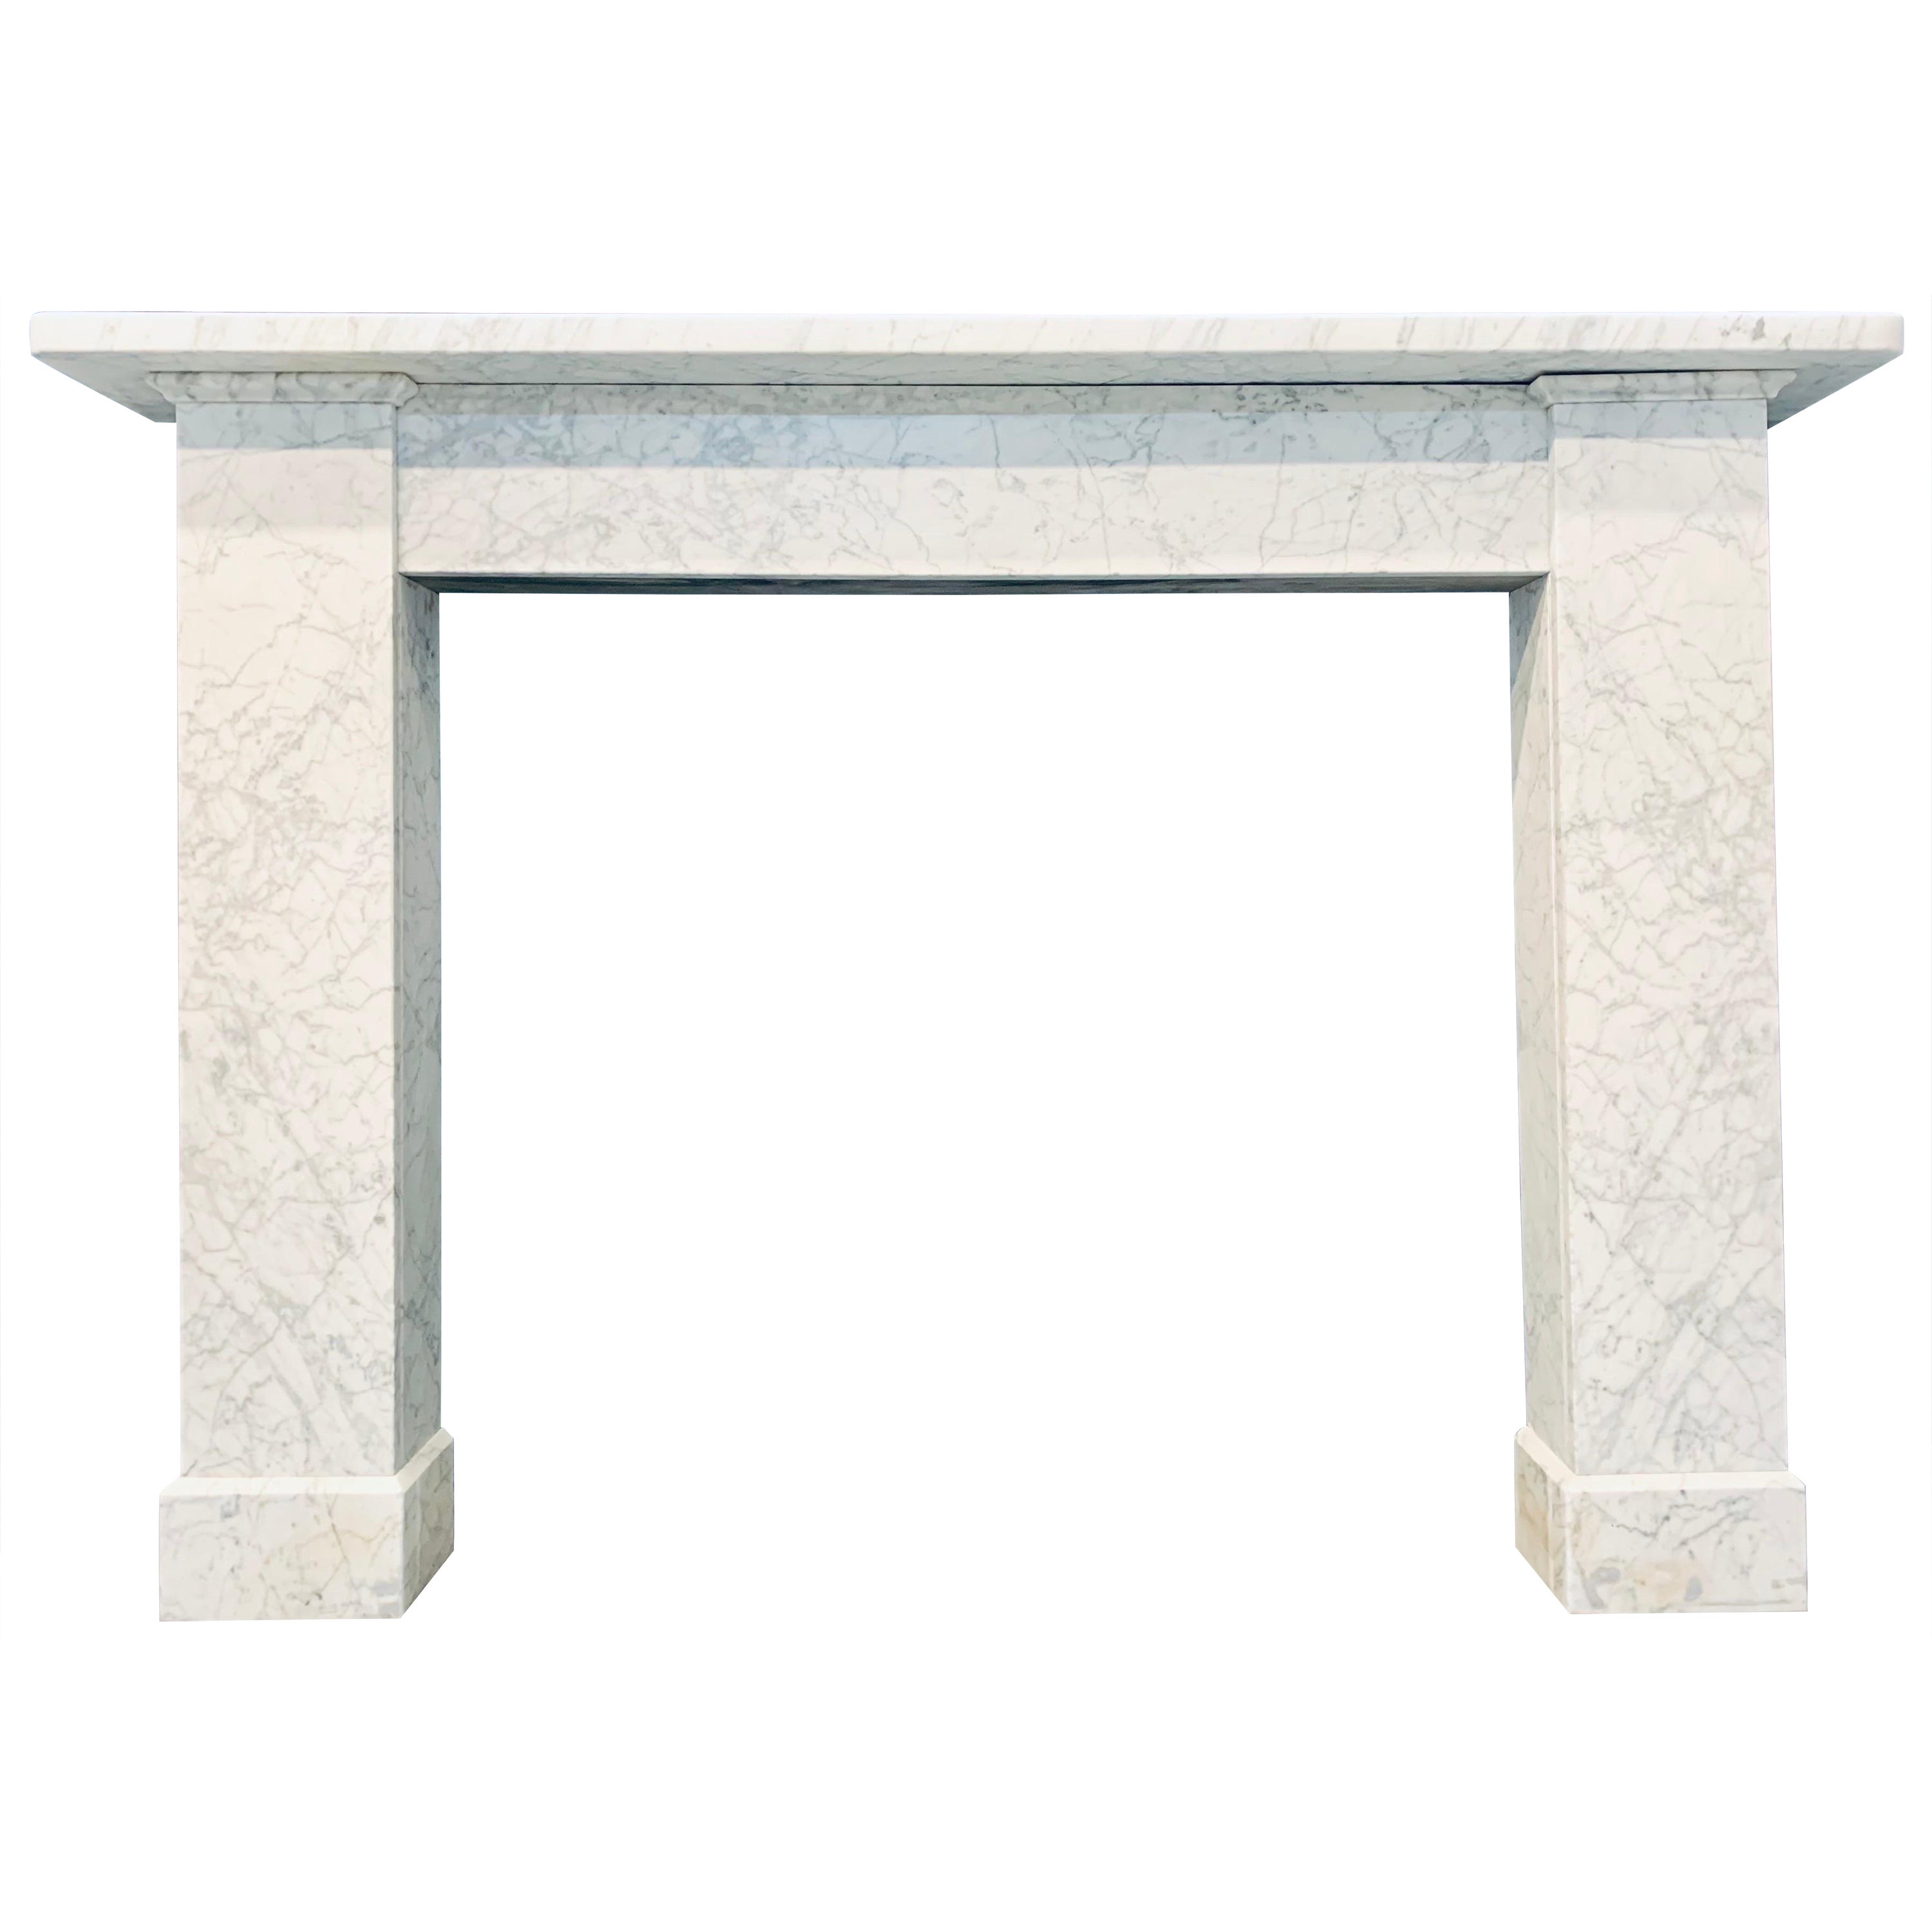 Scottish 19th C Early Victorian Pencil Veined Carrara Marble Fireplace Surround. For Sale